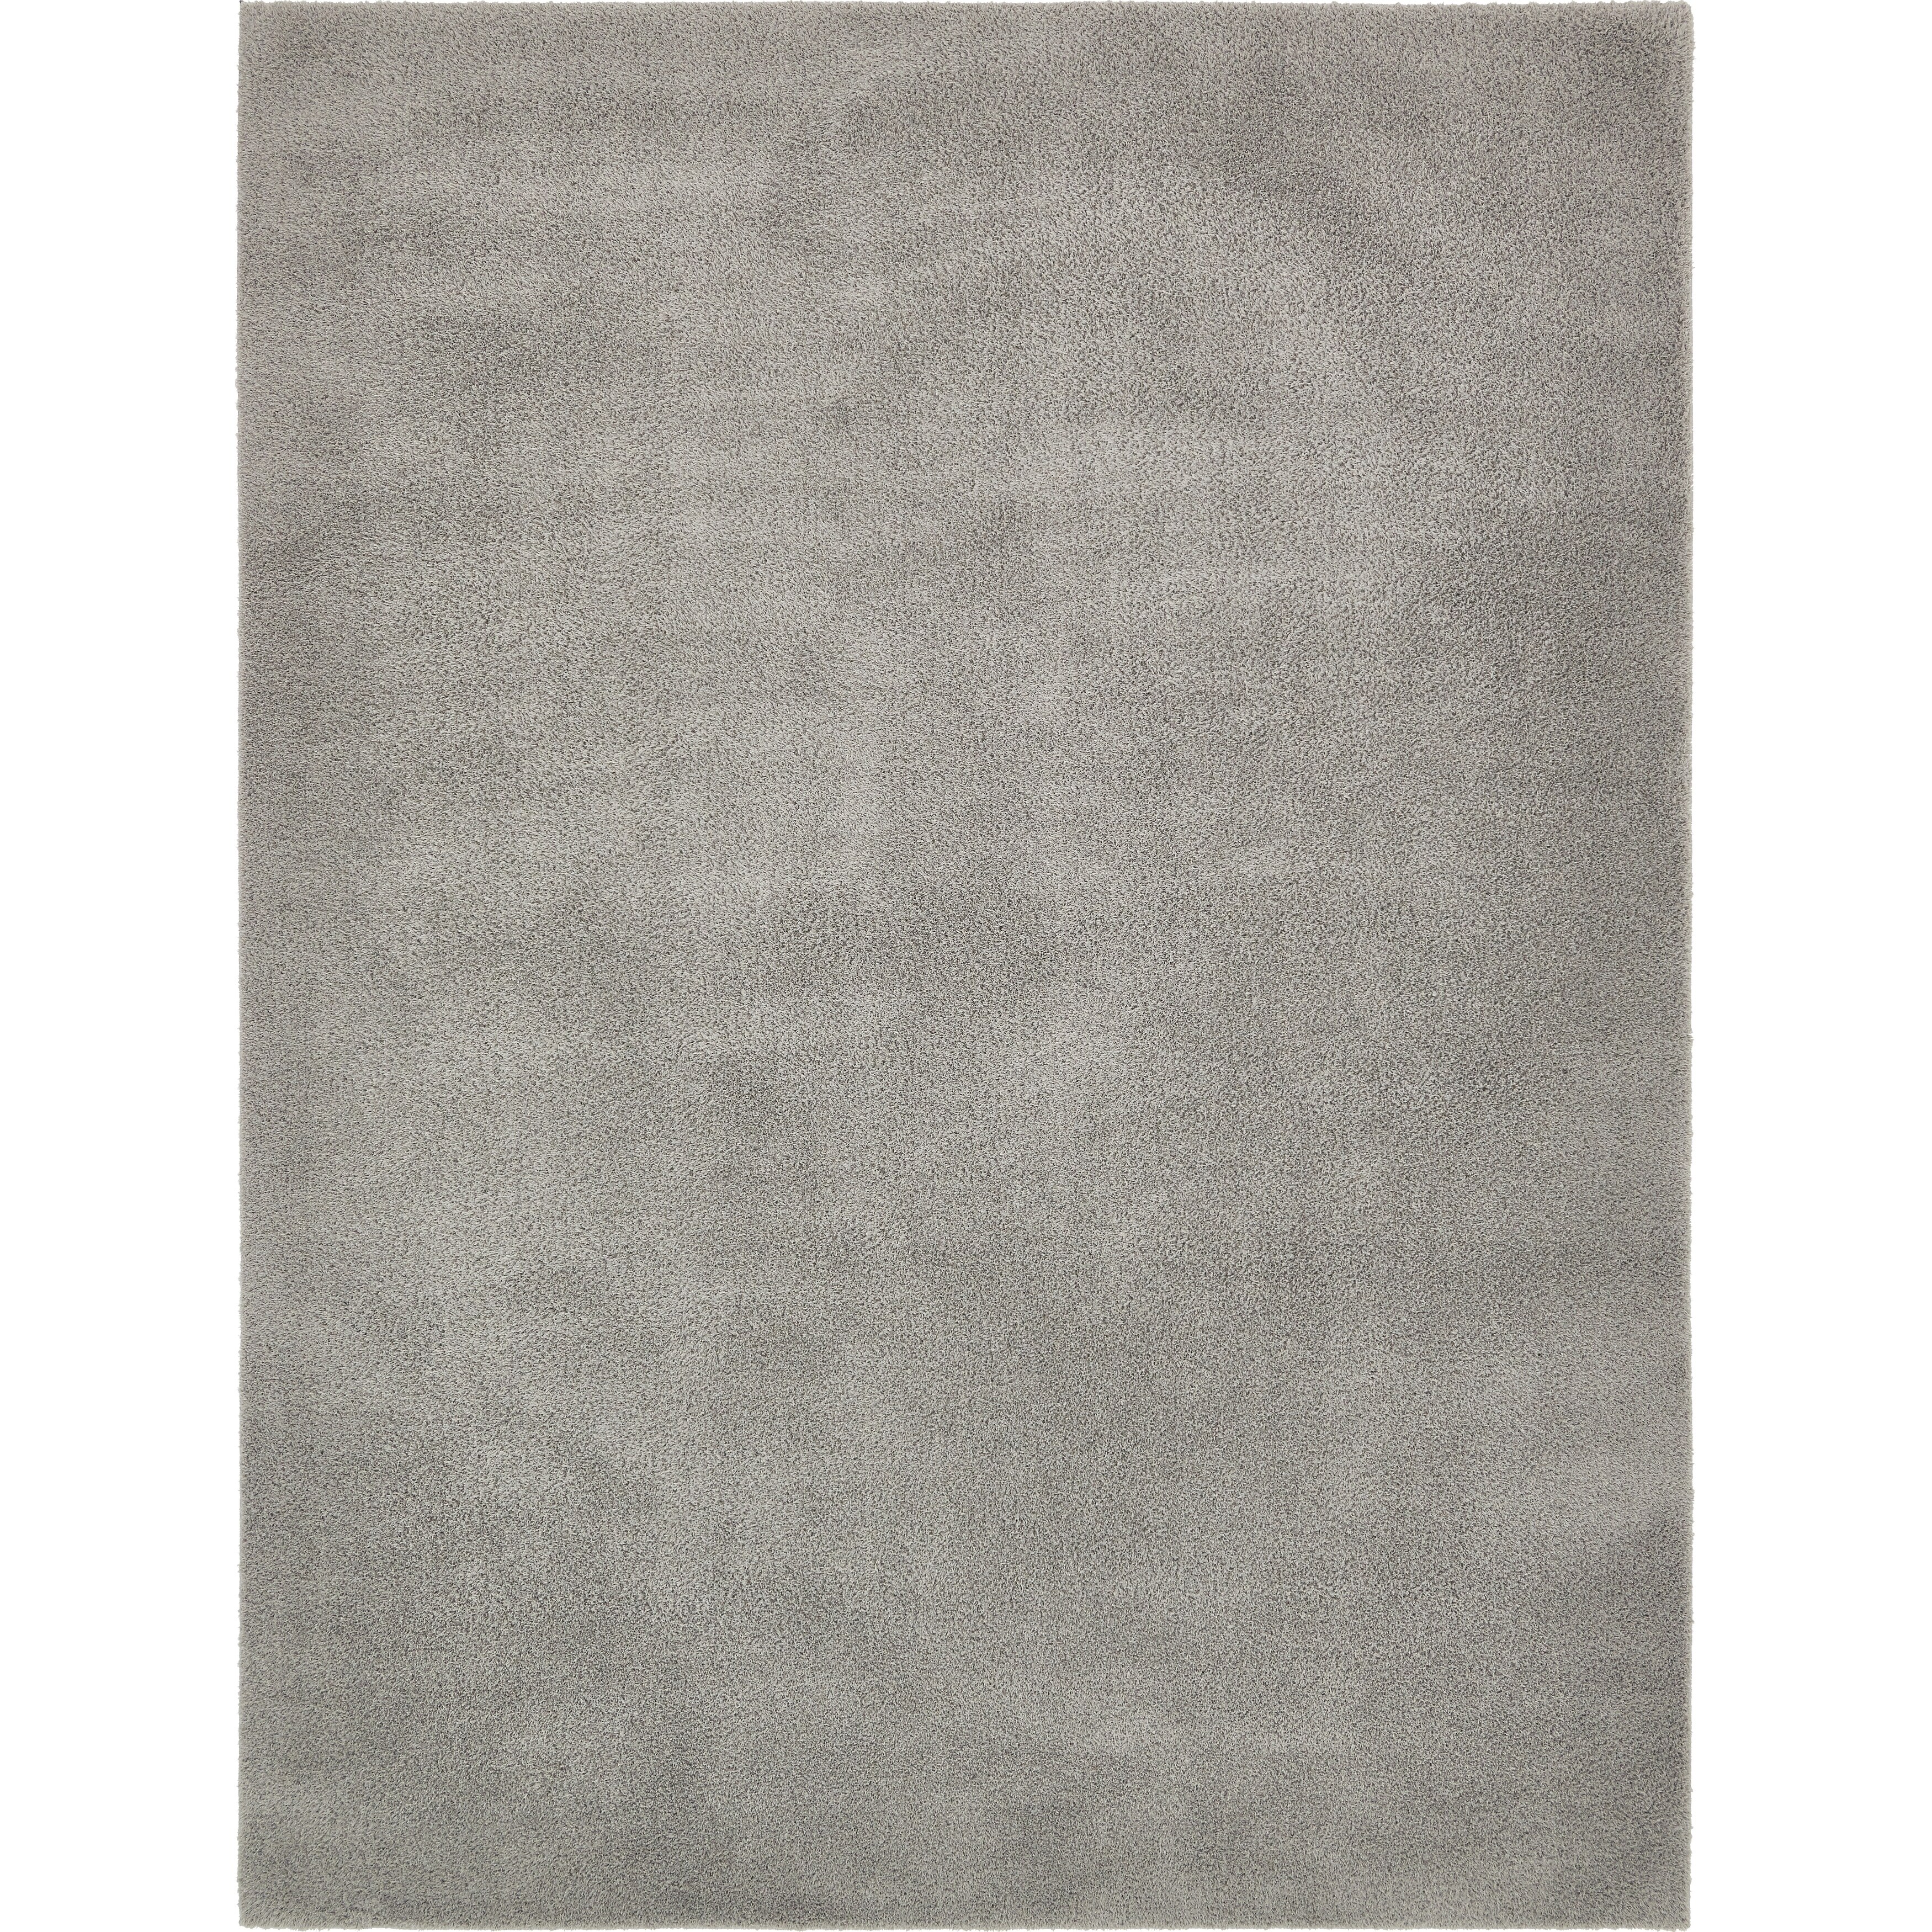 Grey Polyester Rugs Find Great Home Decor Deals Shopping At